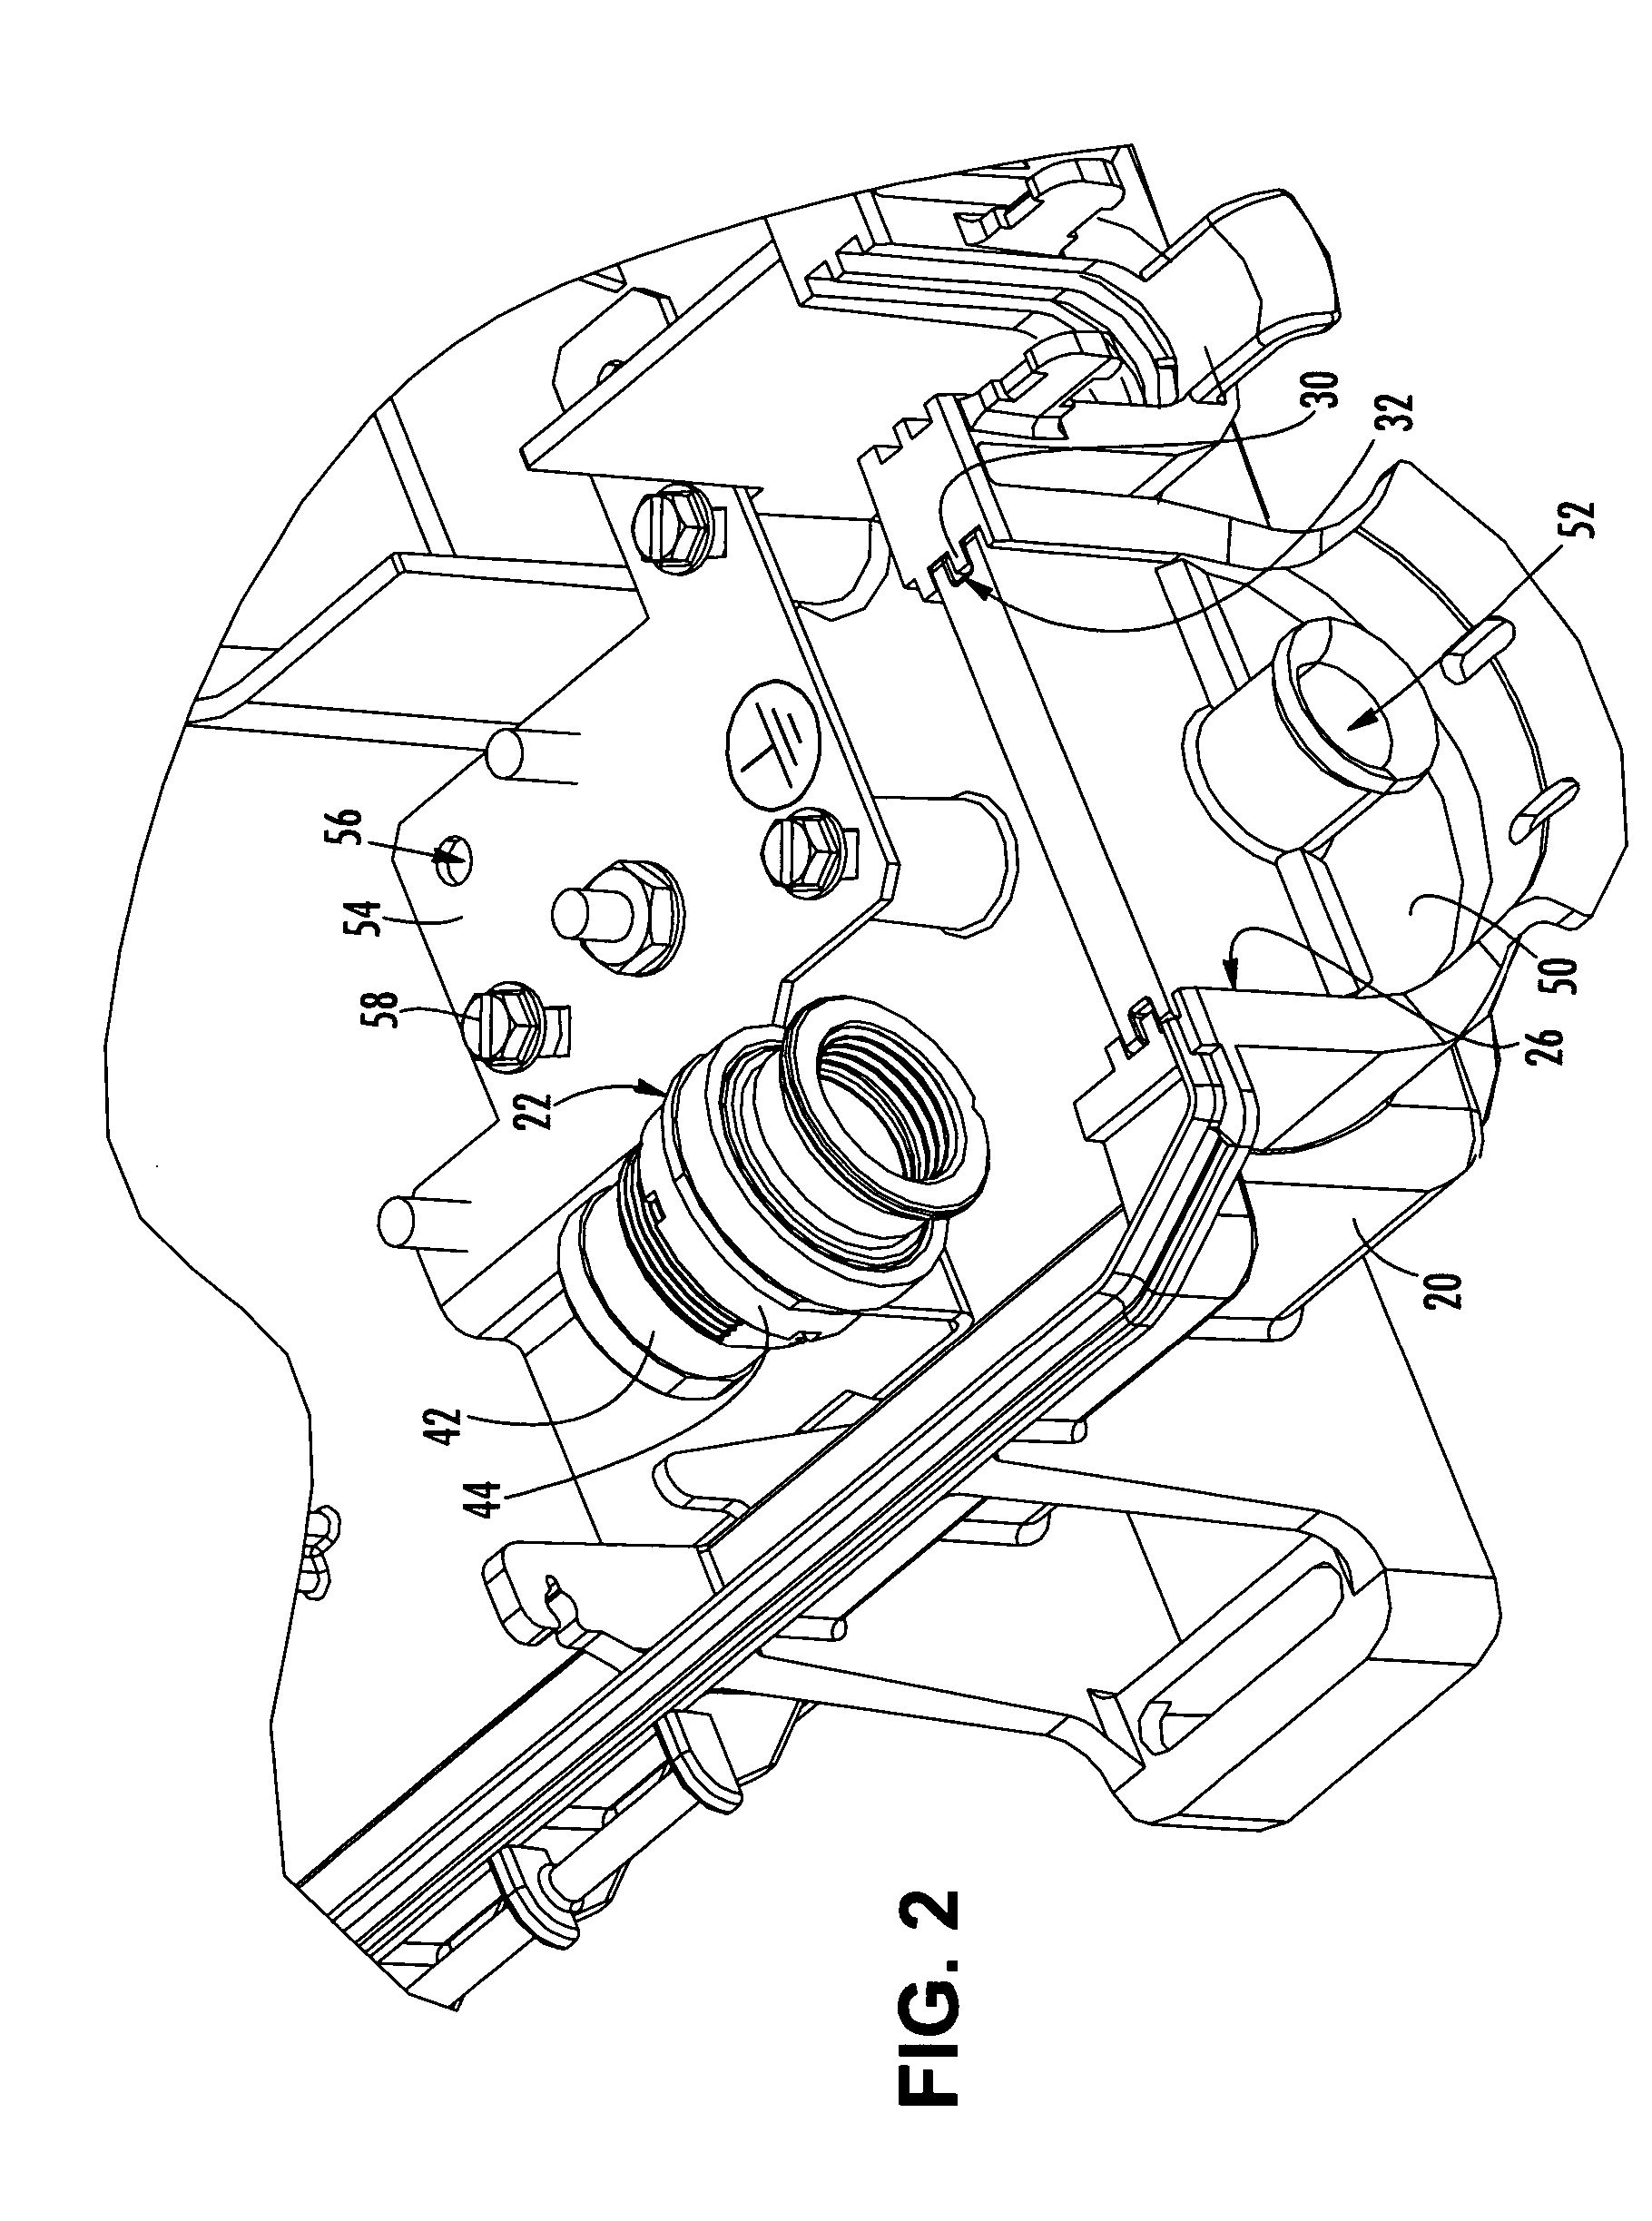 Connector port for network interface device